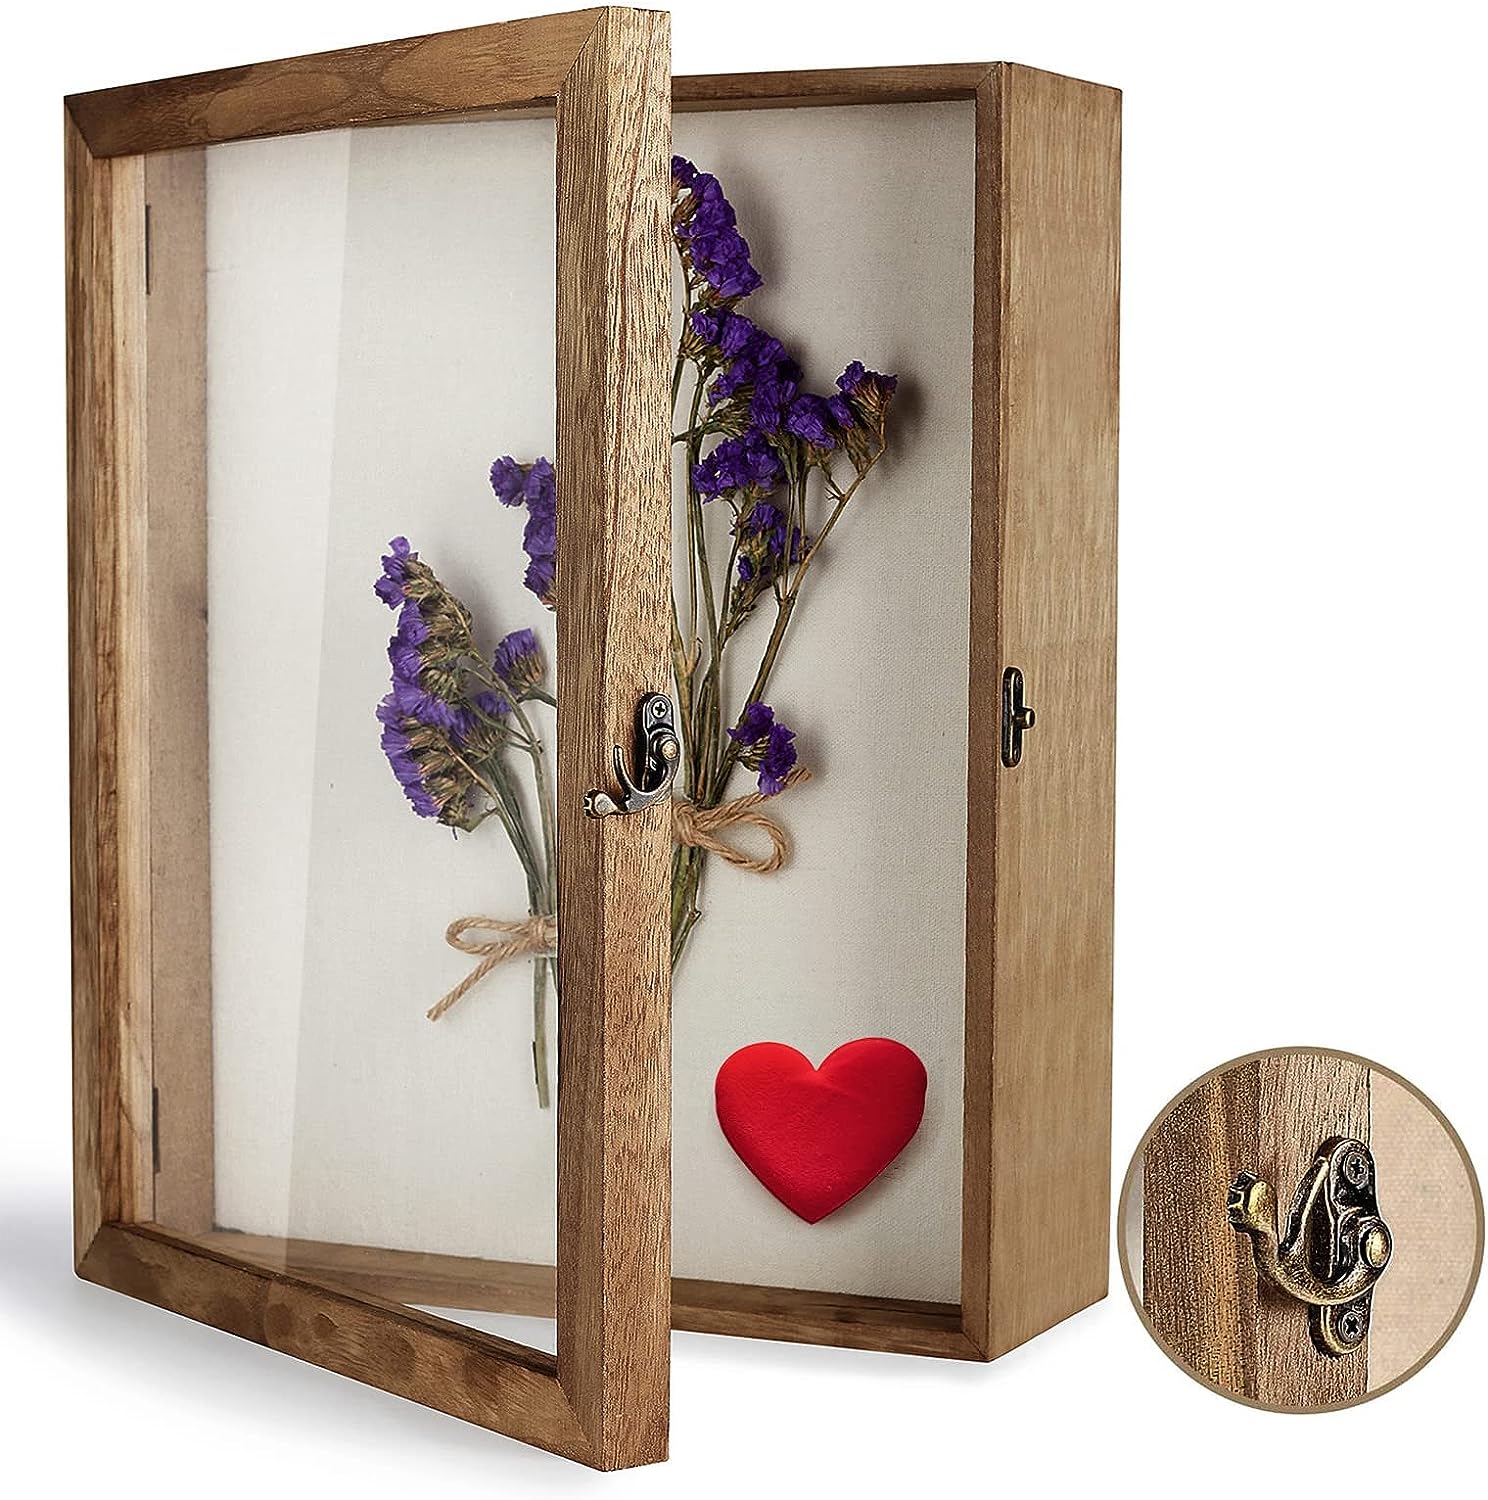 A wooden shadow box frame on a white background